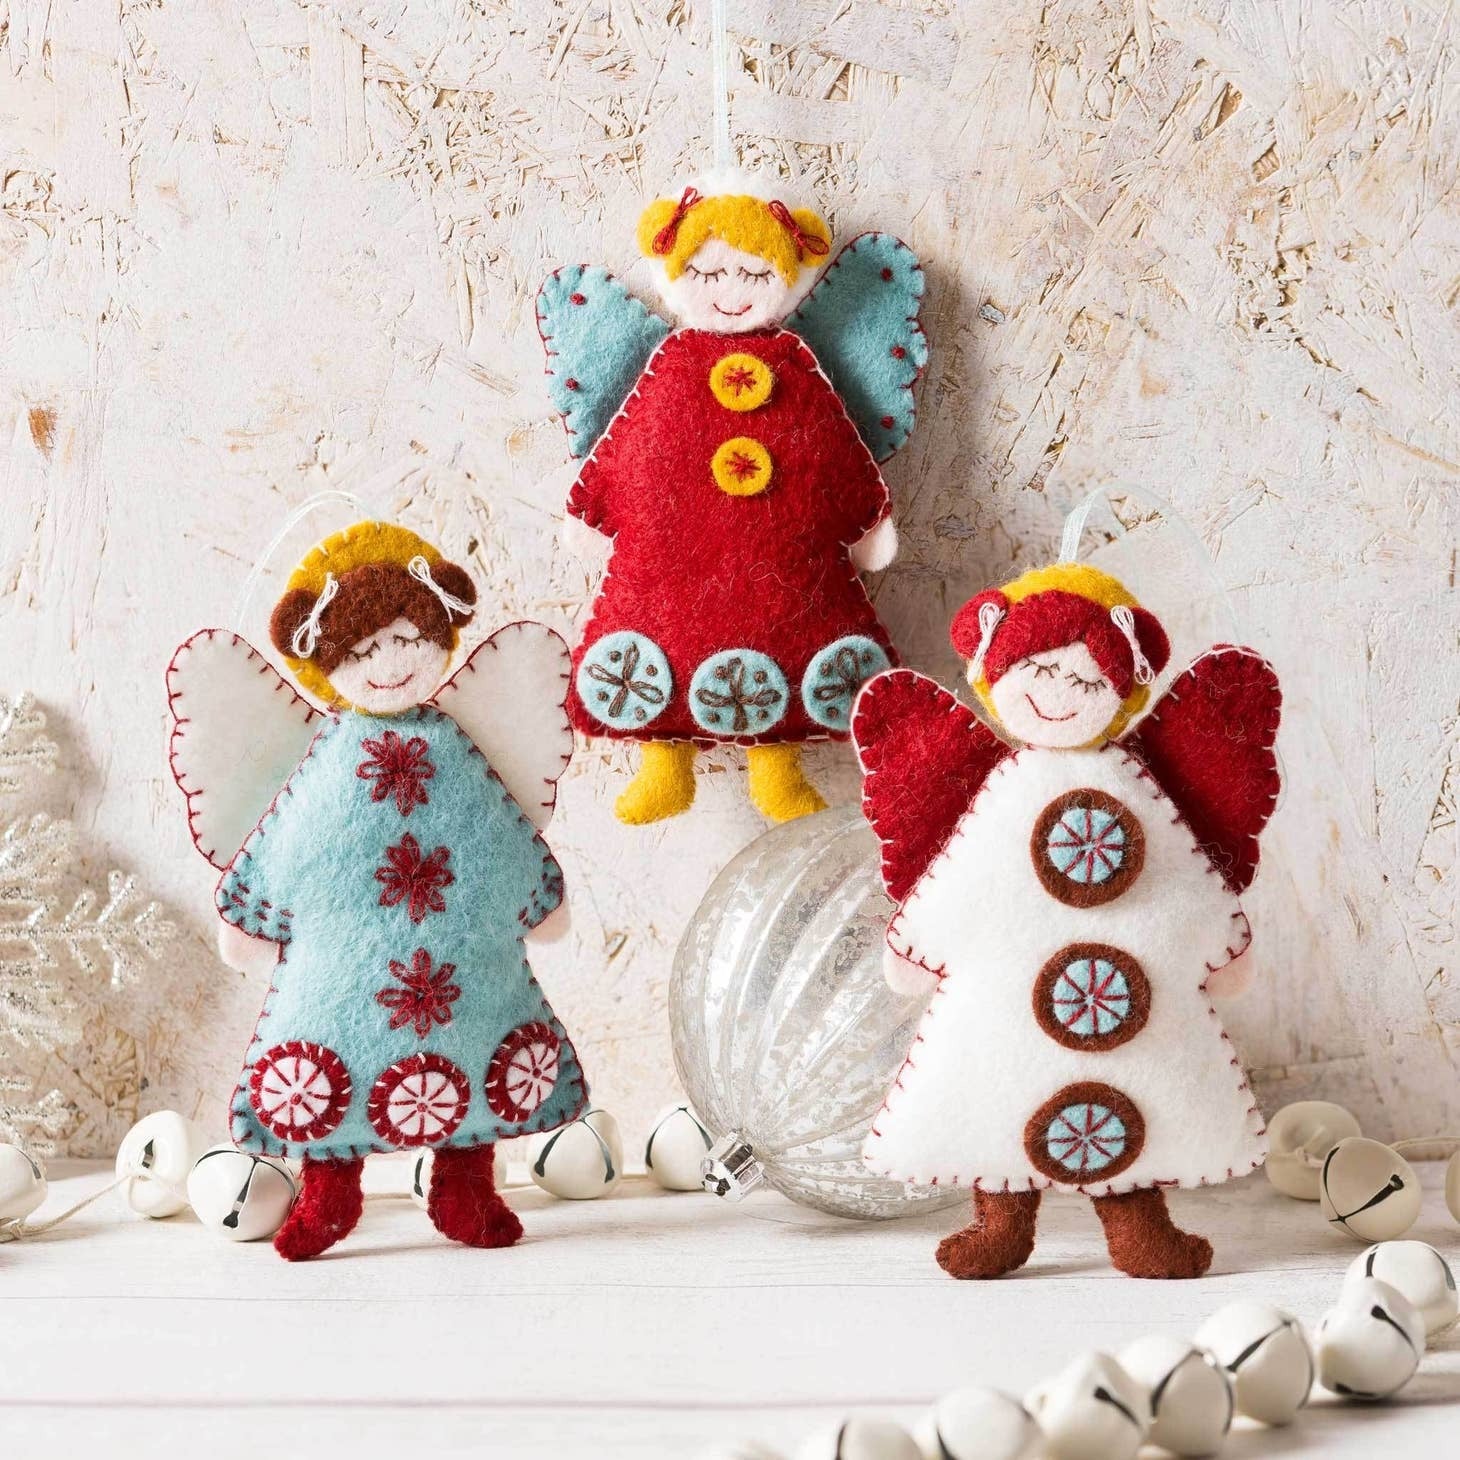 Handcrafted Scandinavian felt angels in vibrant red and blue hues, adorned with intricate embroidery and festive motifs, set against a rustic white background with silver holiday ornaments.